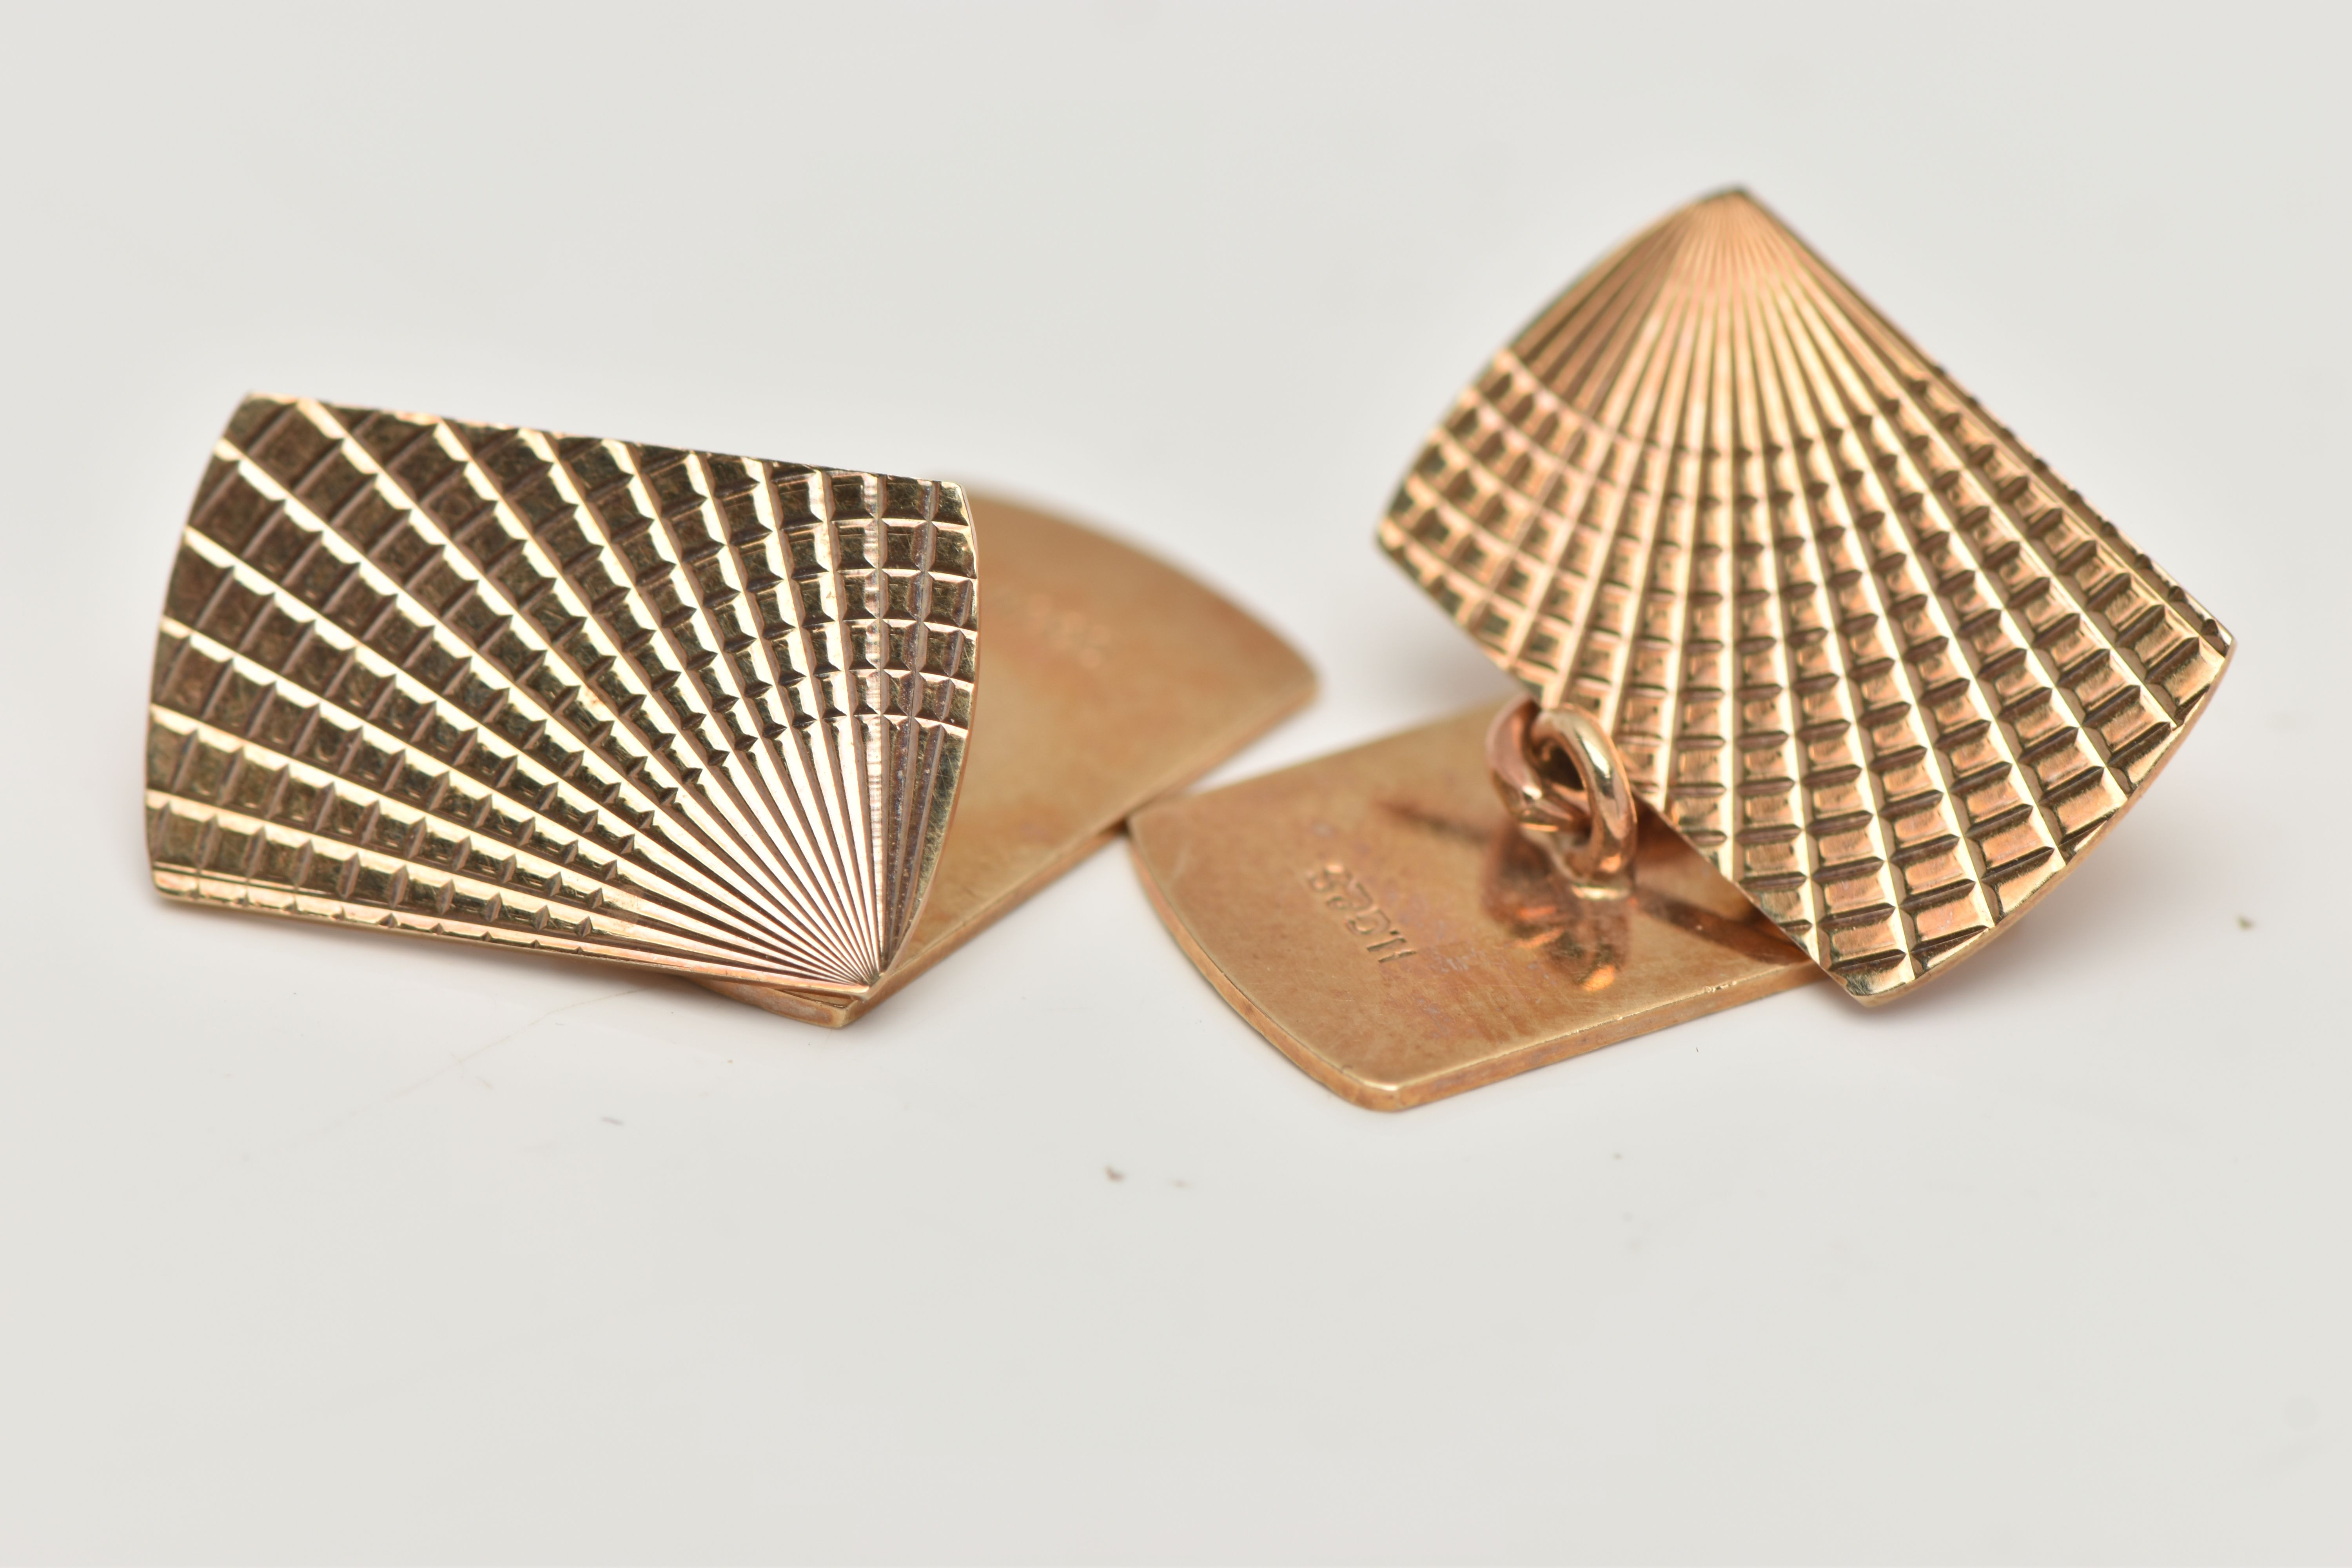 A PAIR OF 9CT GOLD CUFFLINKS, rectangular cufflinks, engine turned pattern, chain link fittings, - Image 2 of 2